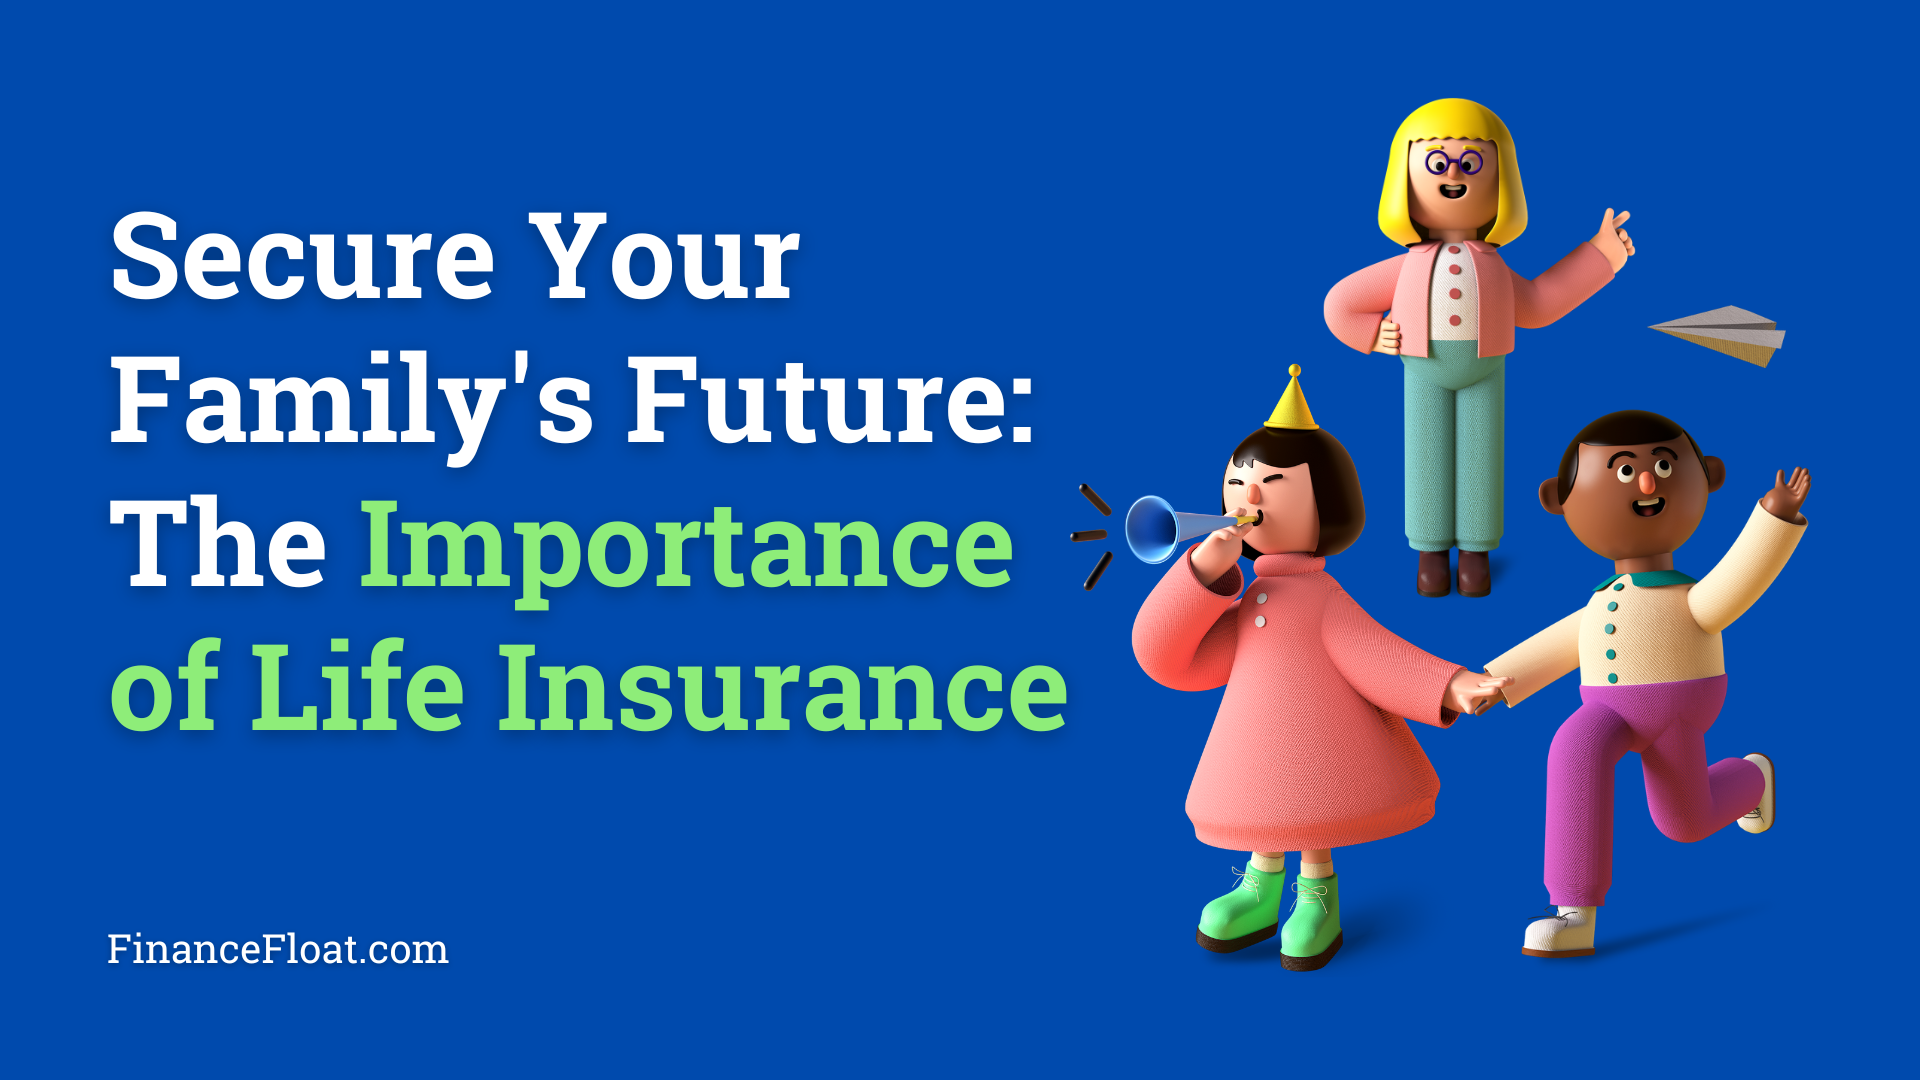 Secure Your Family's Future: The Importance of Life Insurance